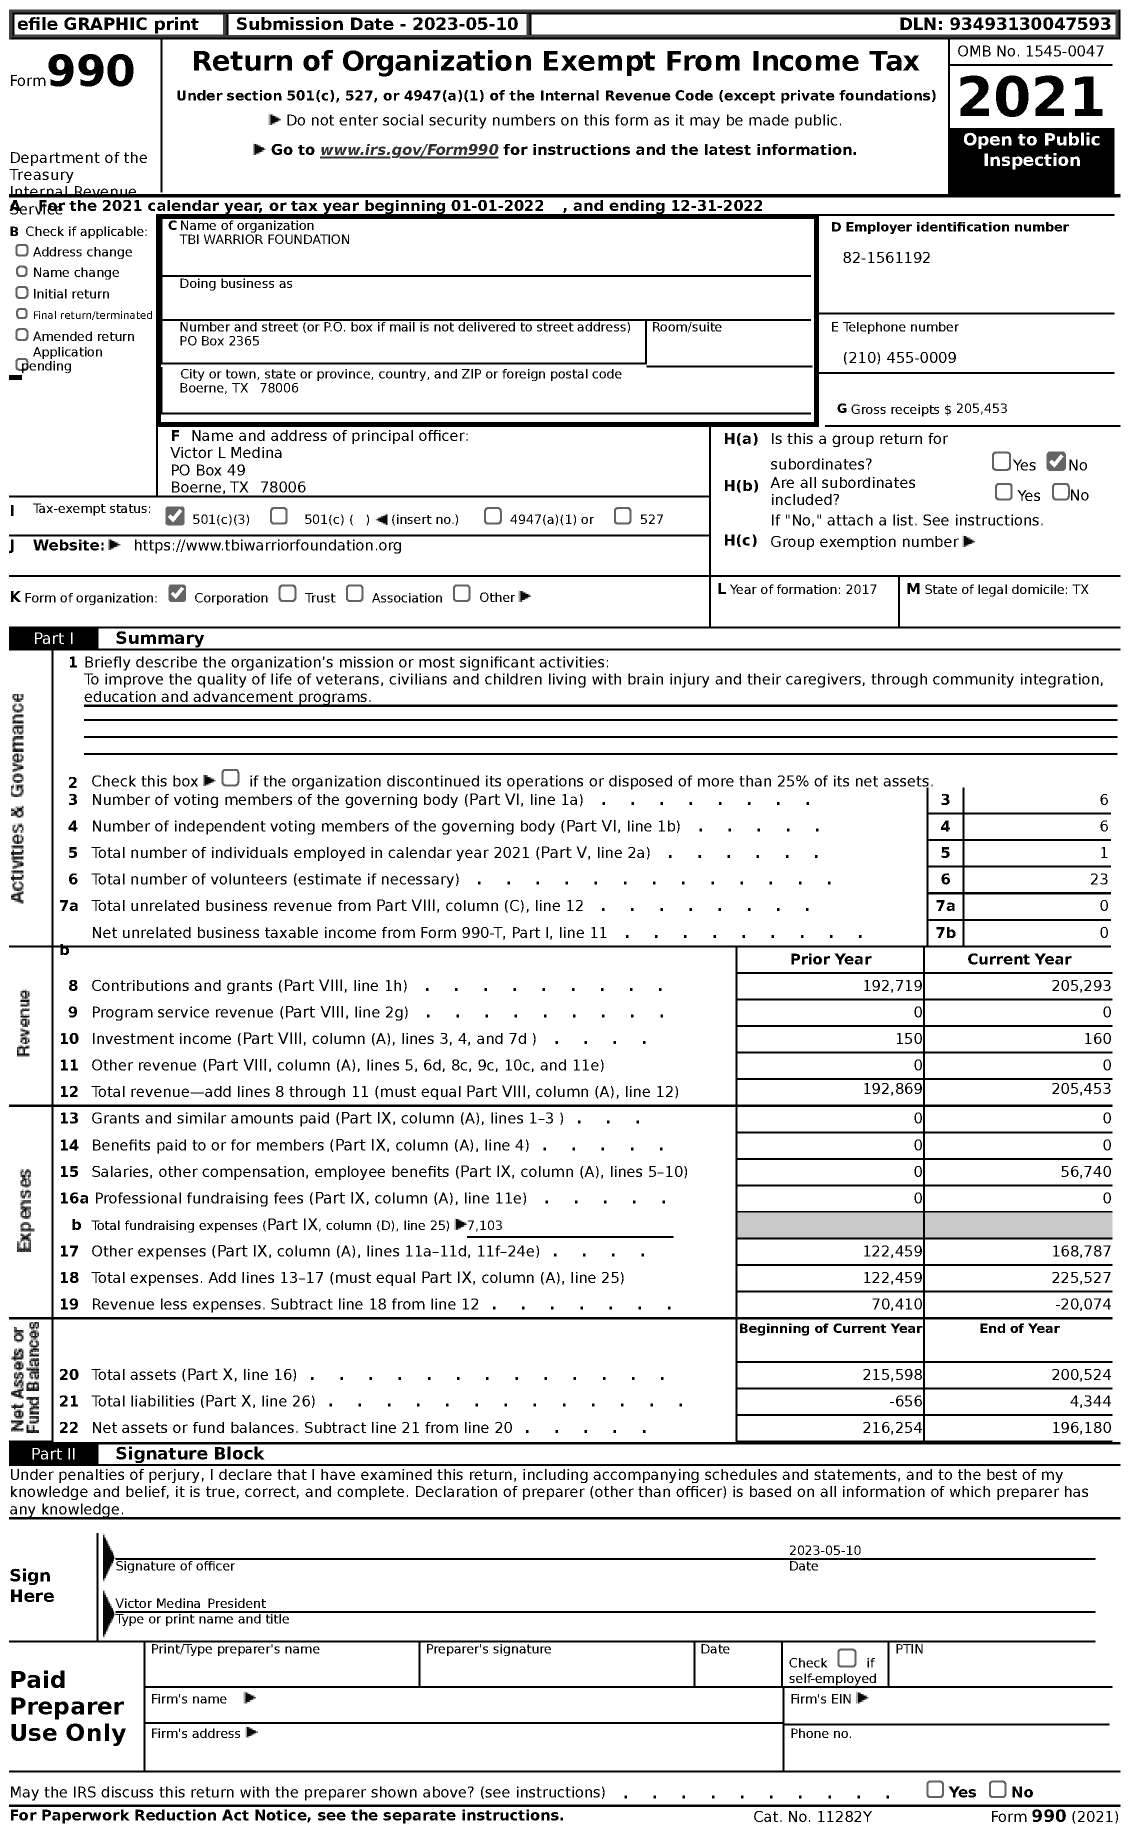 Image of first page of 2022 Form 990 for Tbi Warrior Foundation